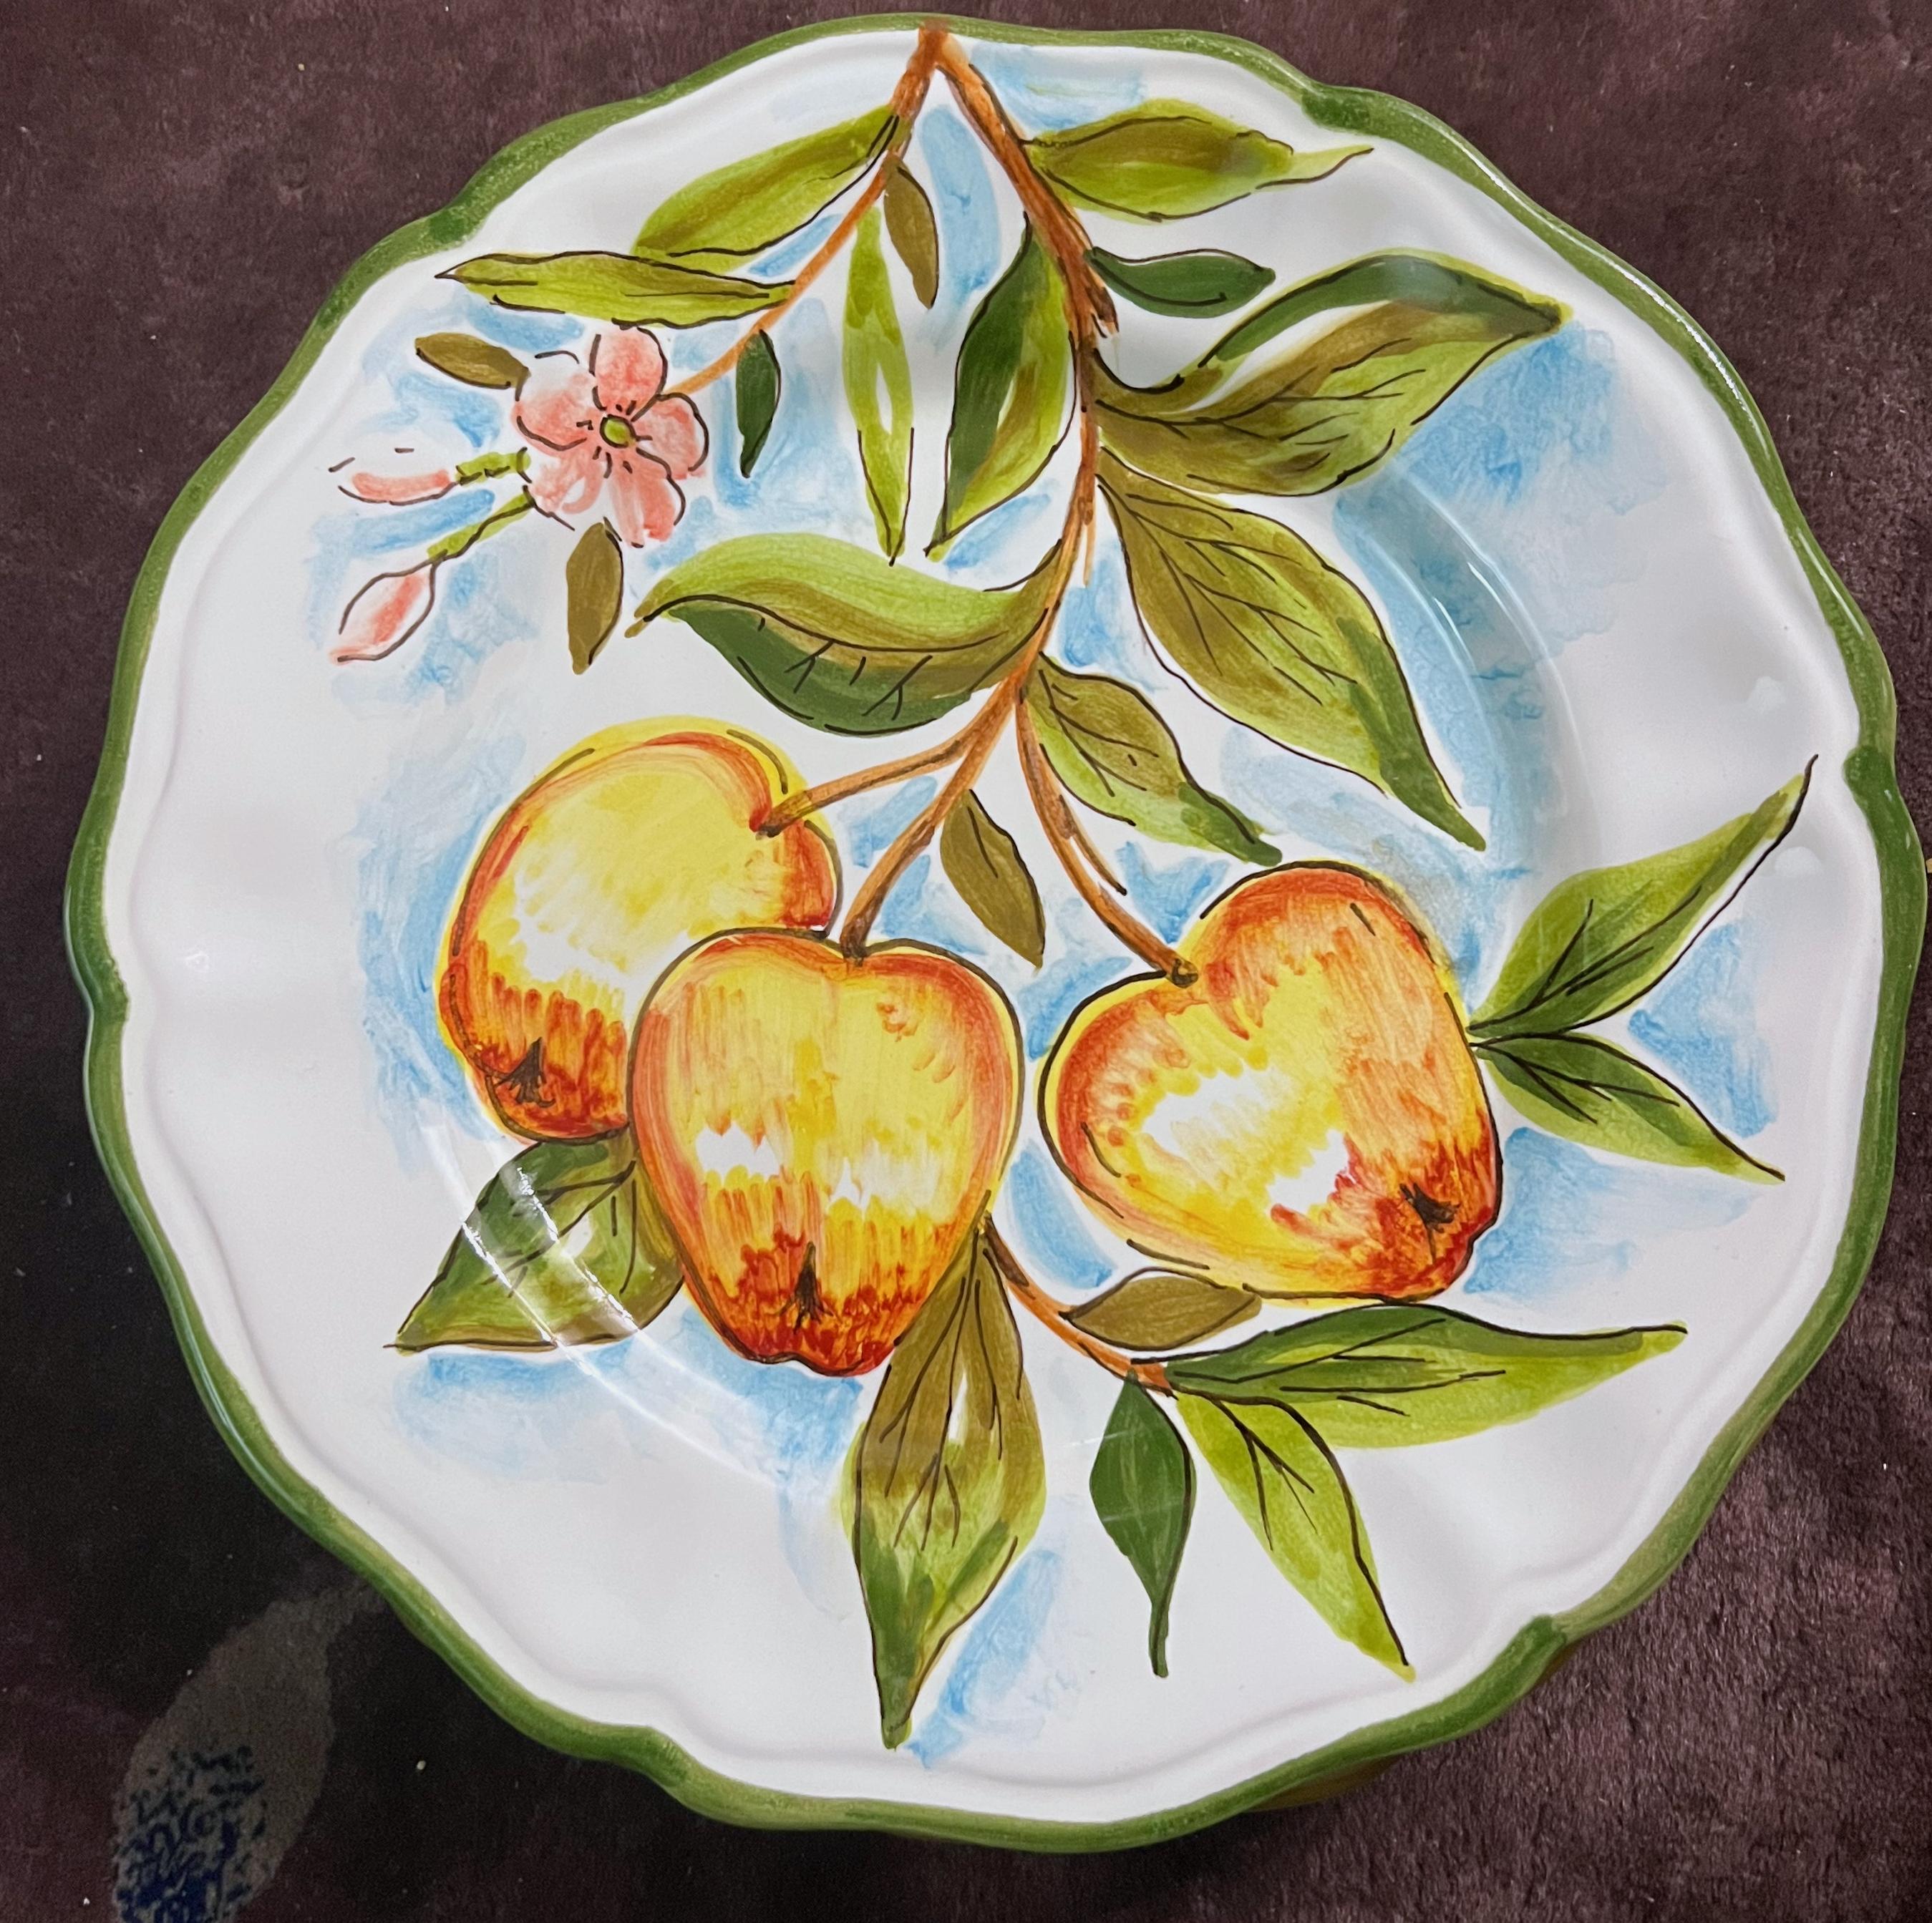 Les Ottomans Le Bois Ceramic Plates Set of 4, Hand-Painted Scallop-Edged, Italy  1